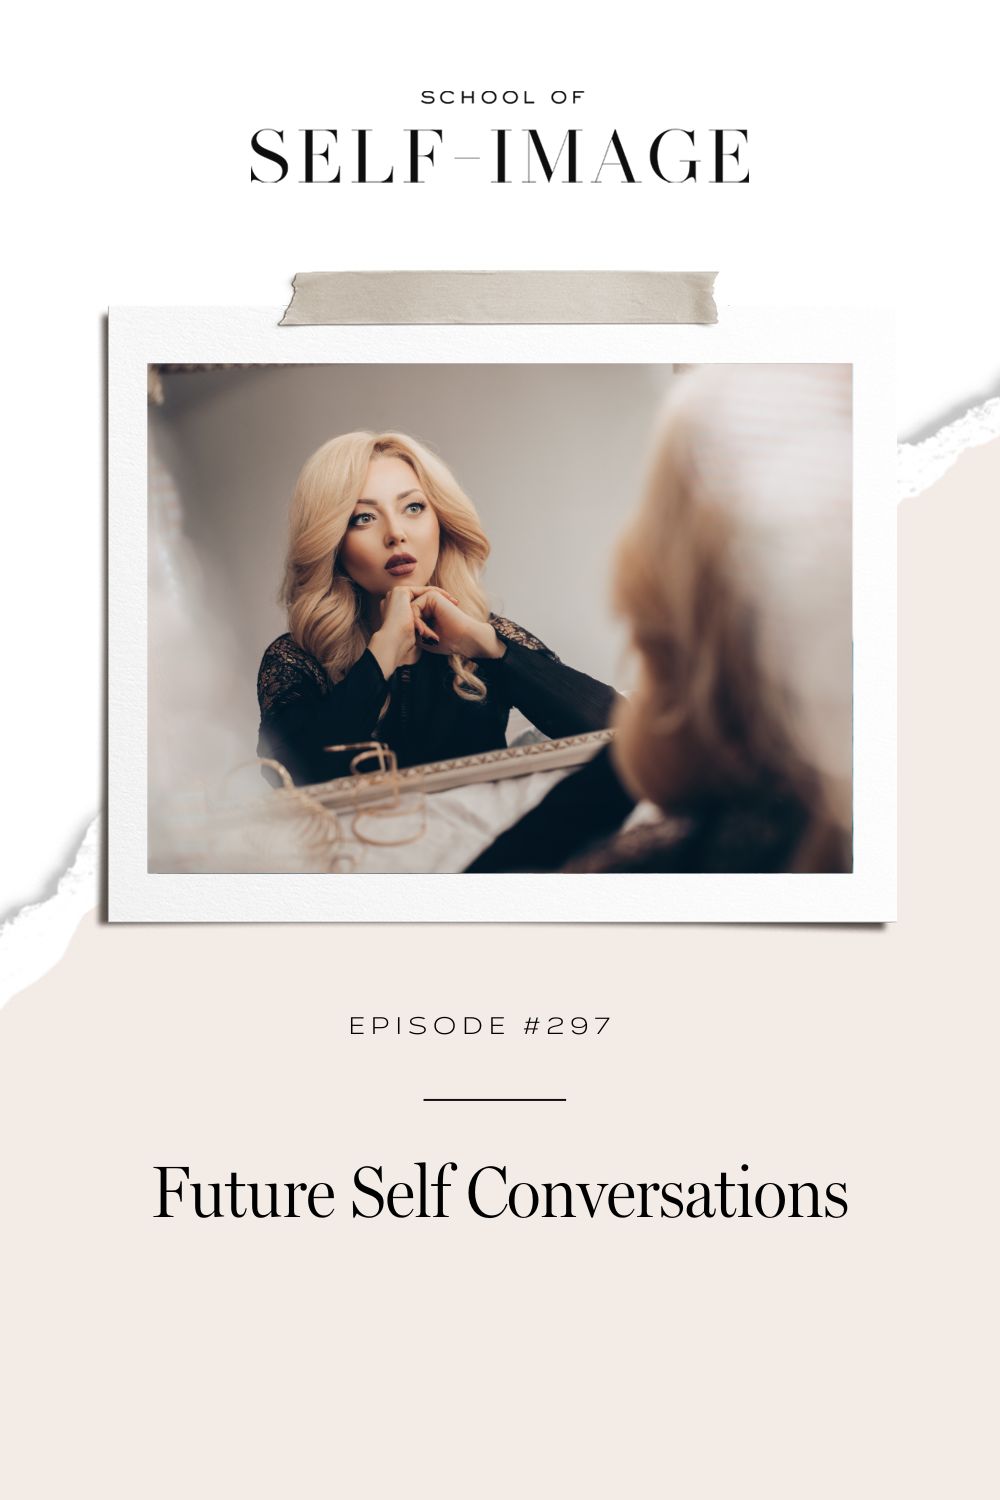   How a conversation with your future self will help you create what you truly desire.